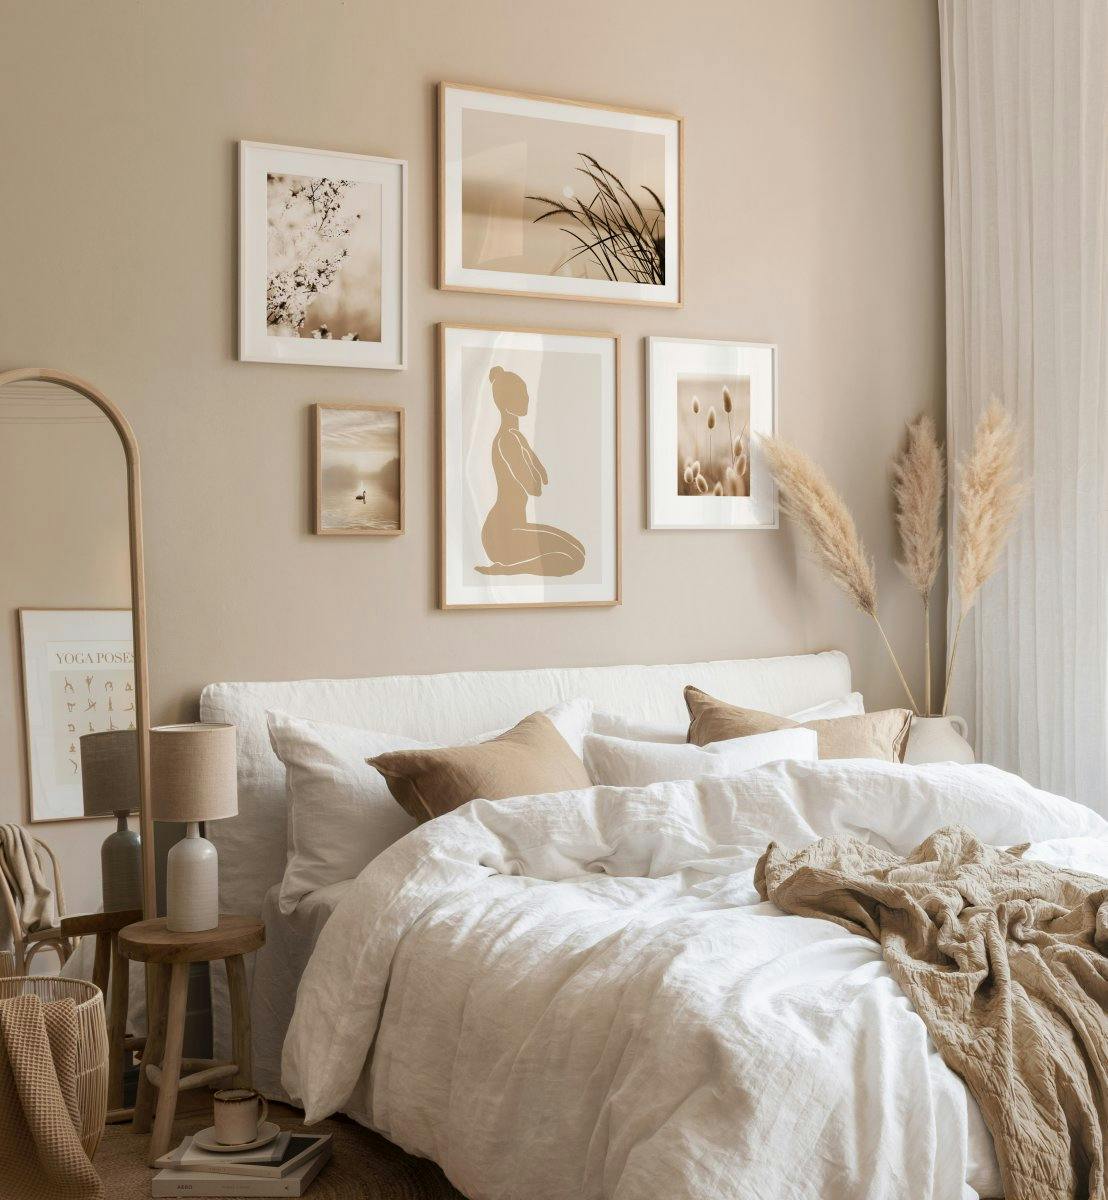 Photographs from nature and illustrations in calm colours for bedroom